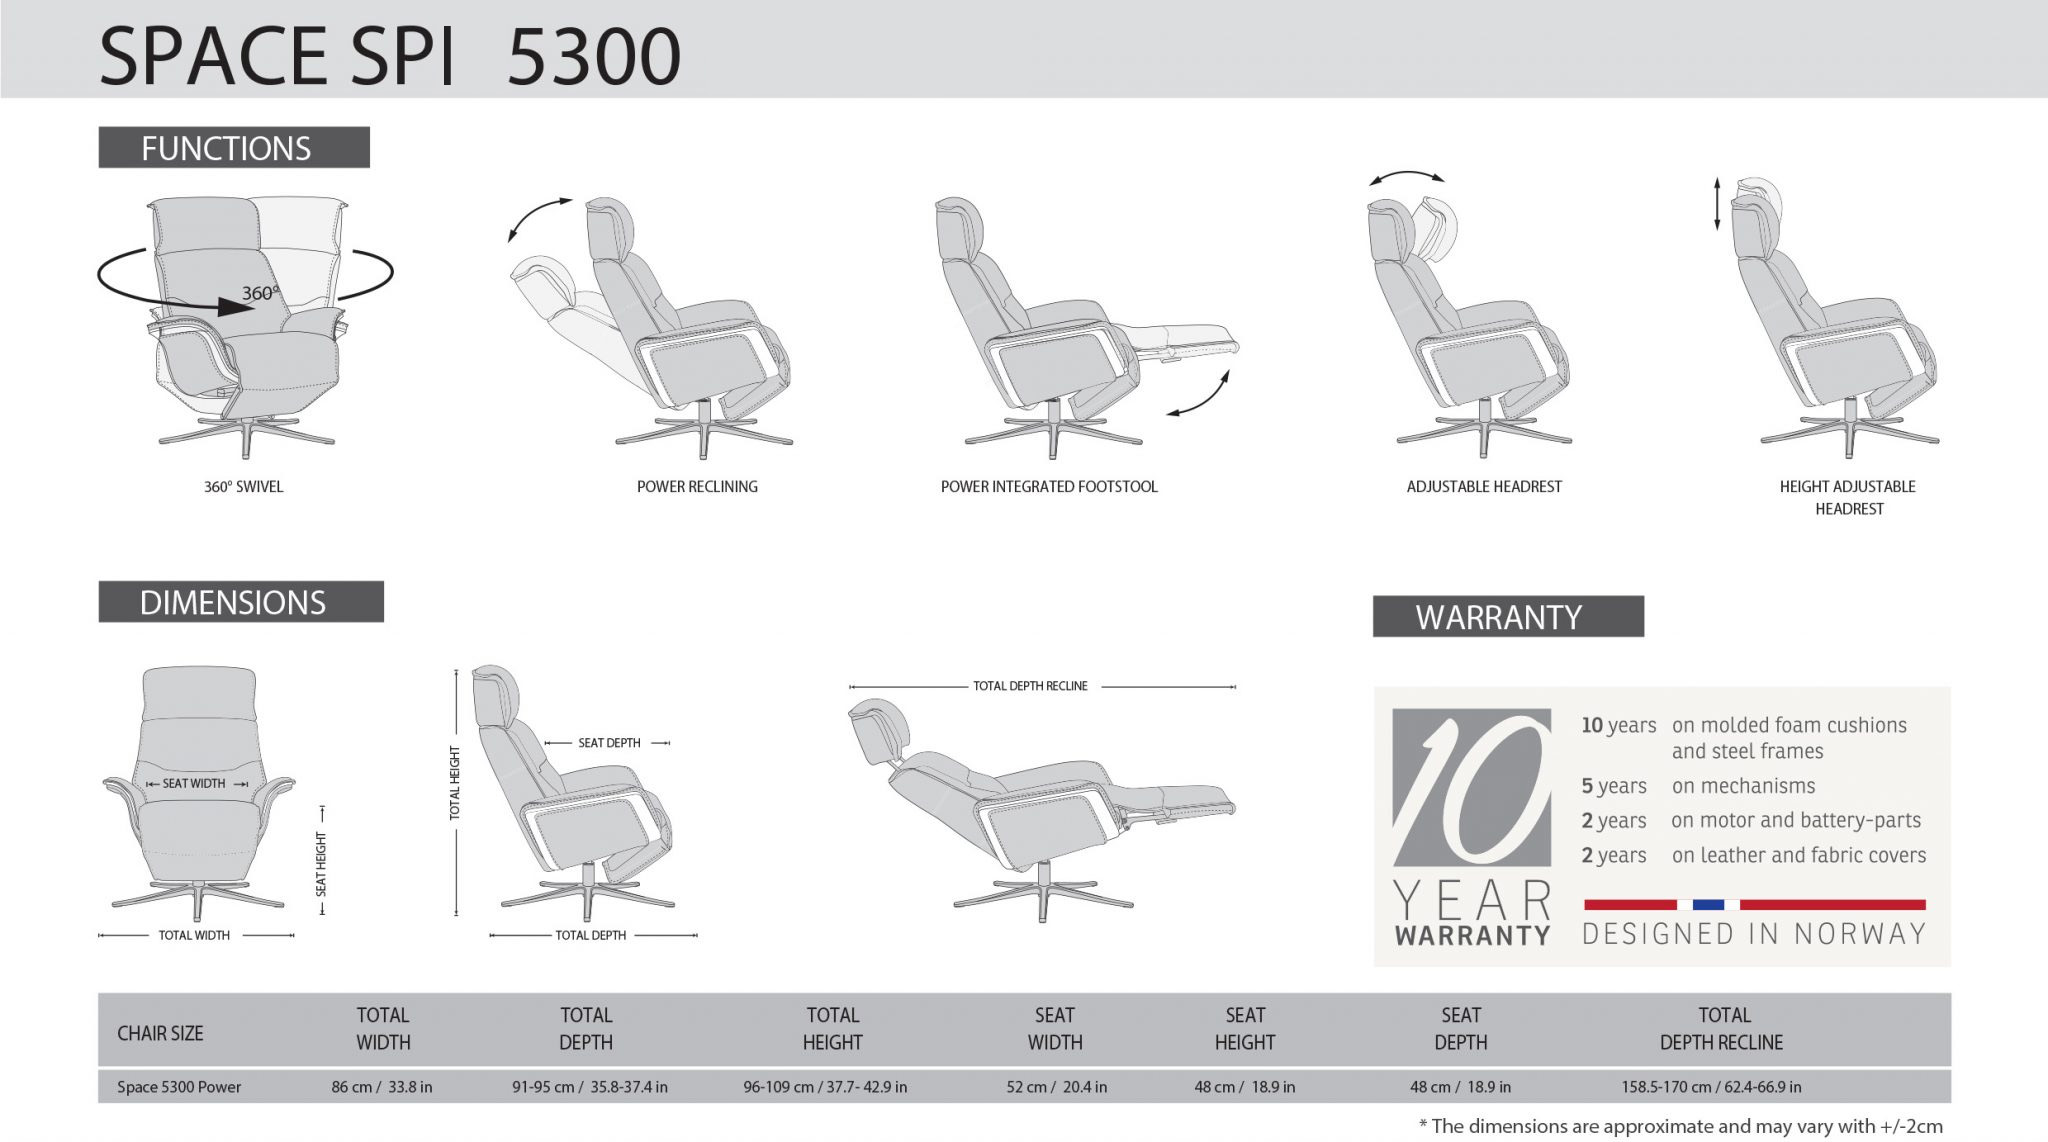 IMG Space SPM5300 Recliner Dimensions